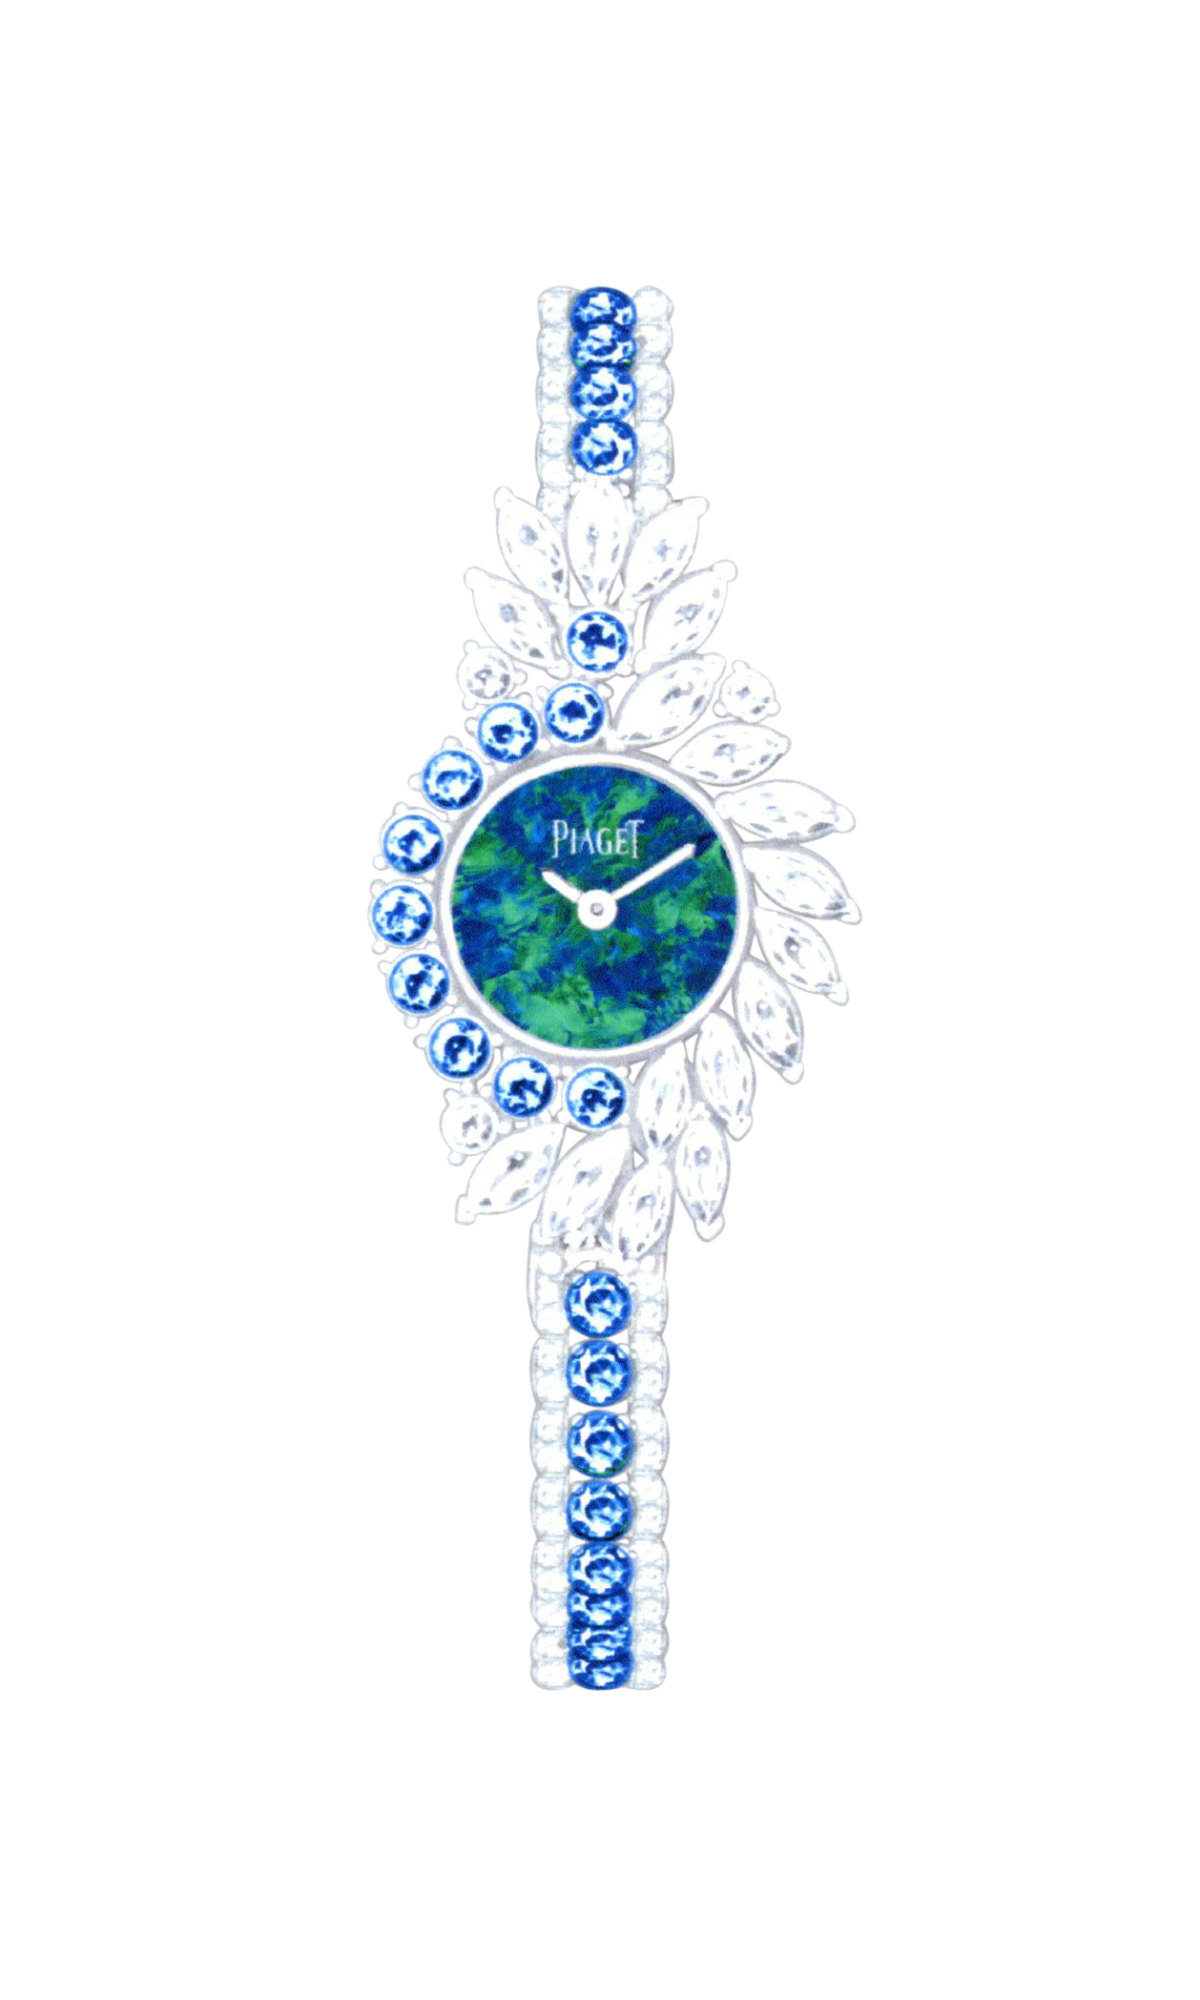 Piaget Reveals Its Last Chapter Of The Solstice Collection: Tonight's Ours Forever